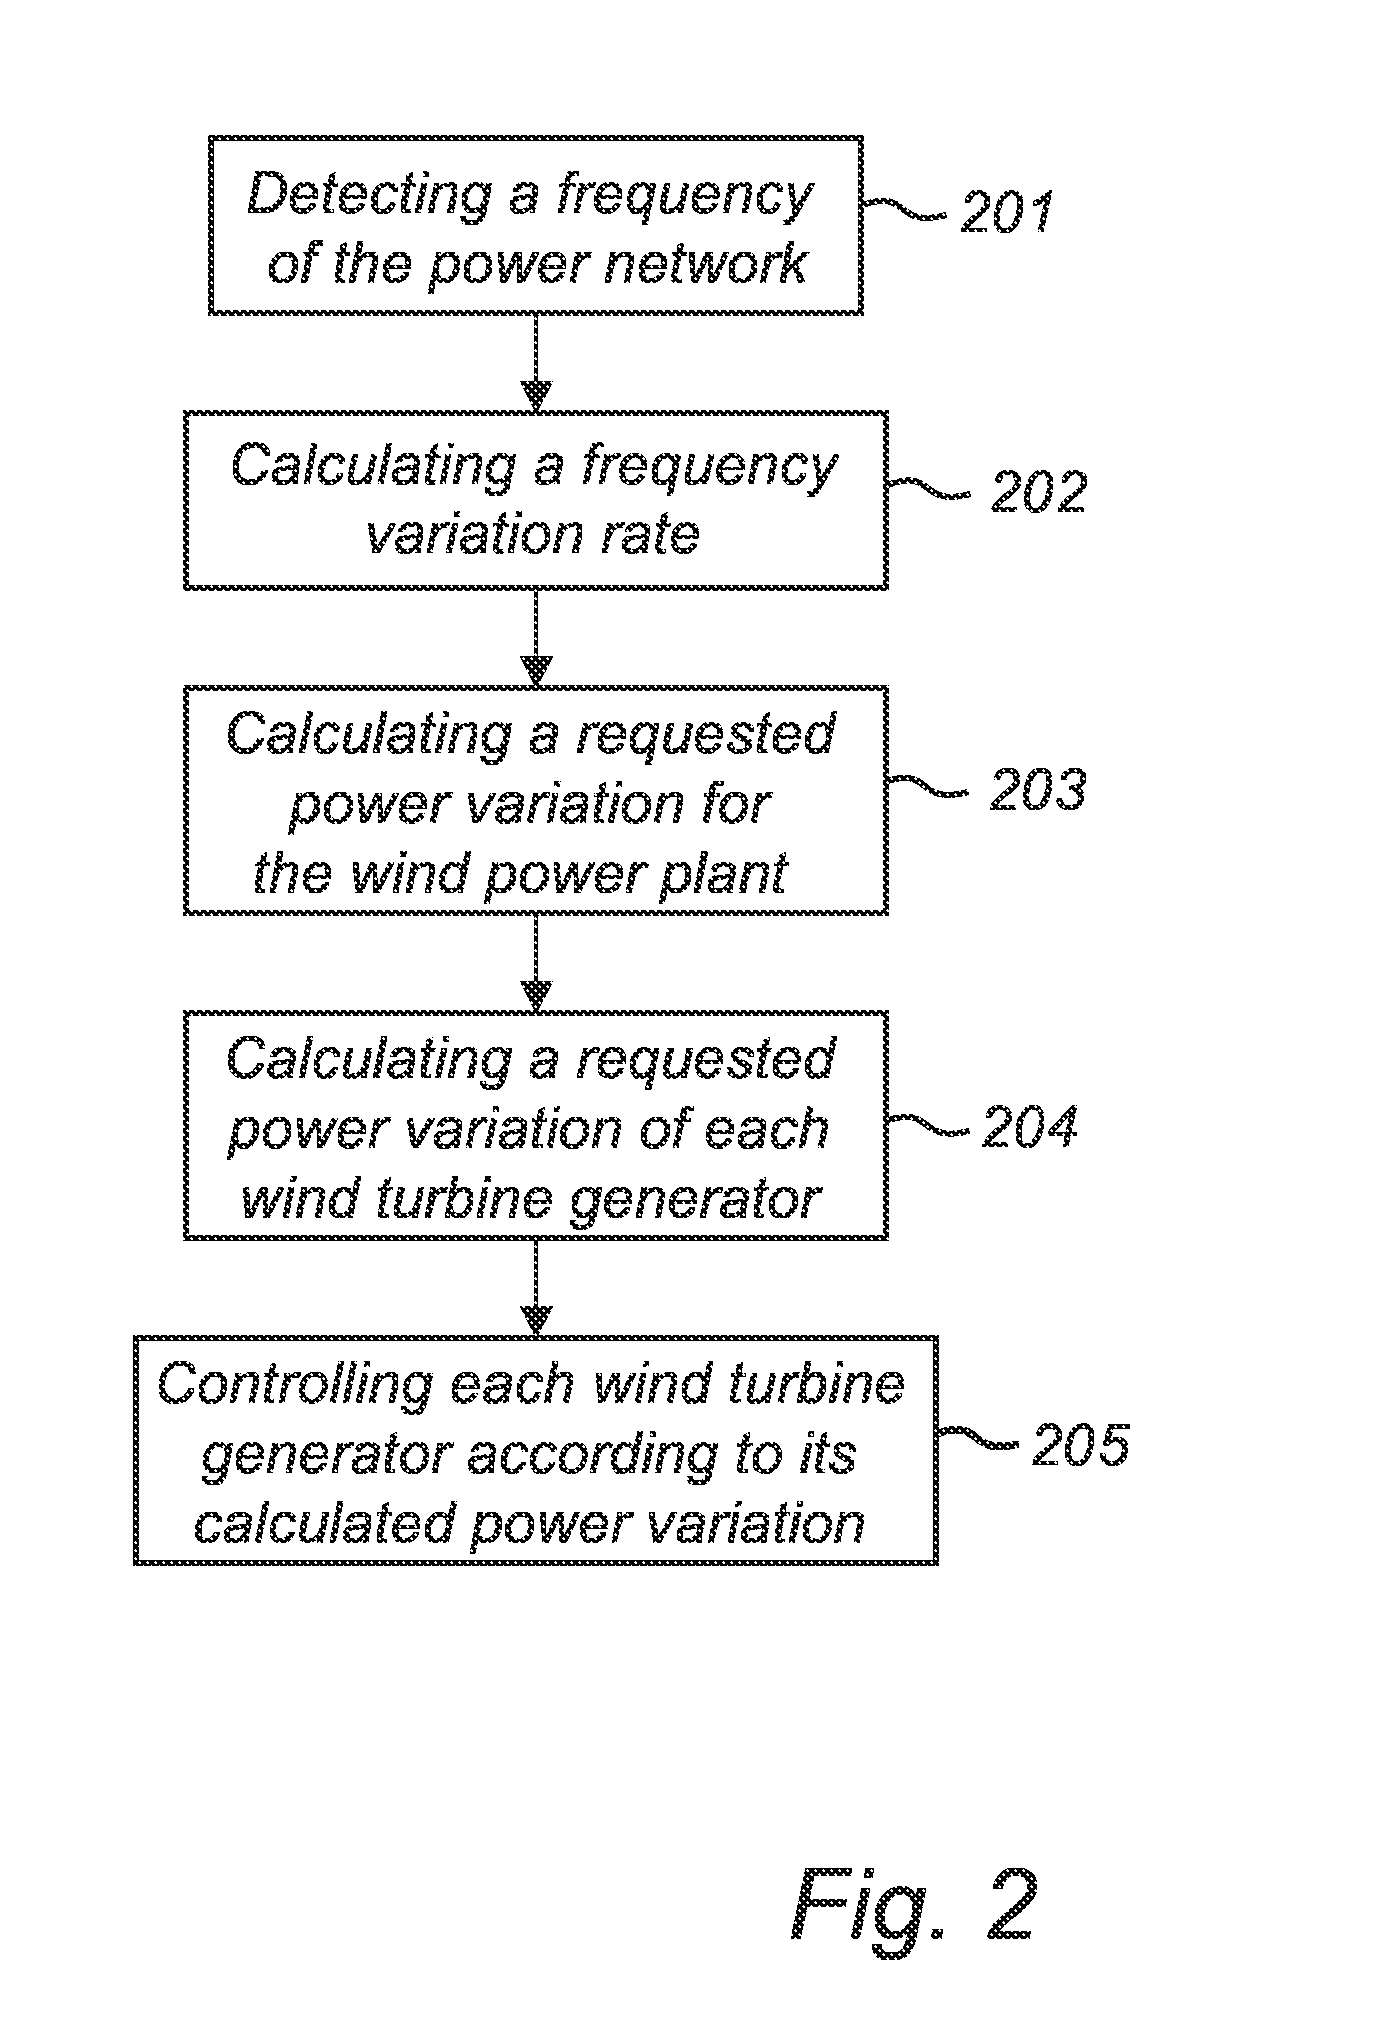 Method and system for controlling a wind power plant comprising a number of wind turbine generators